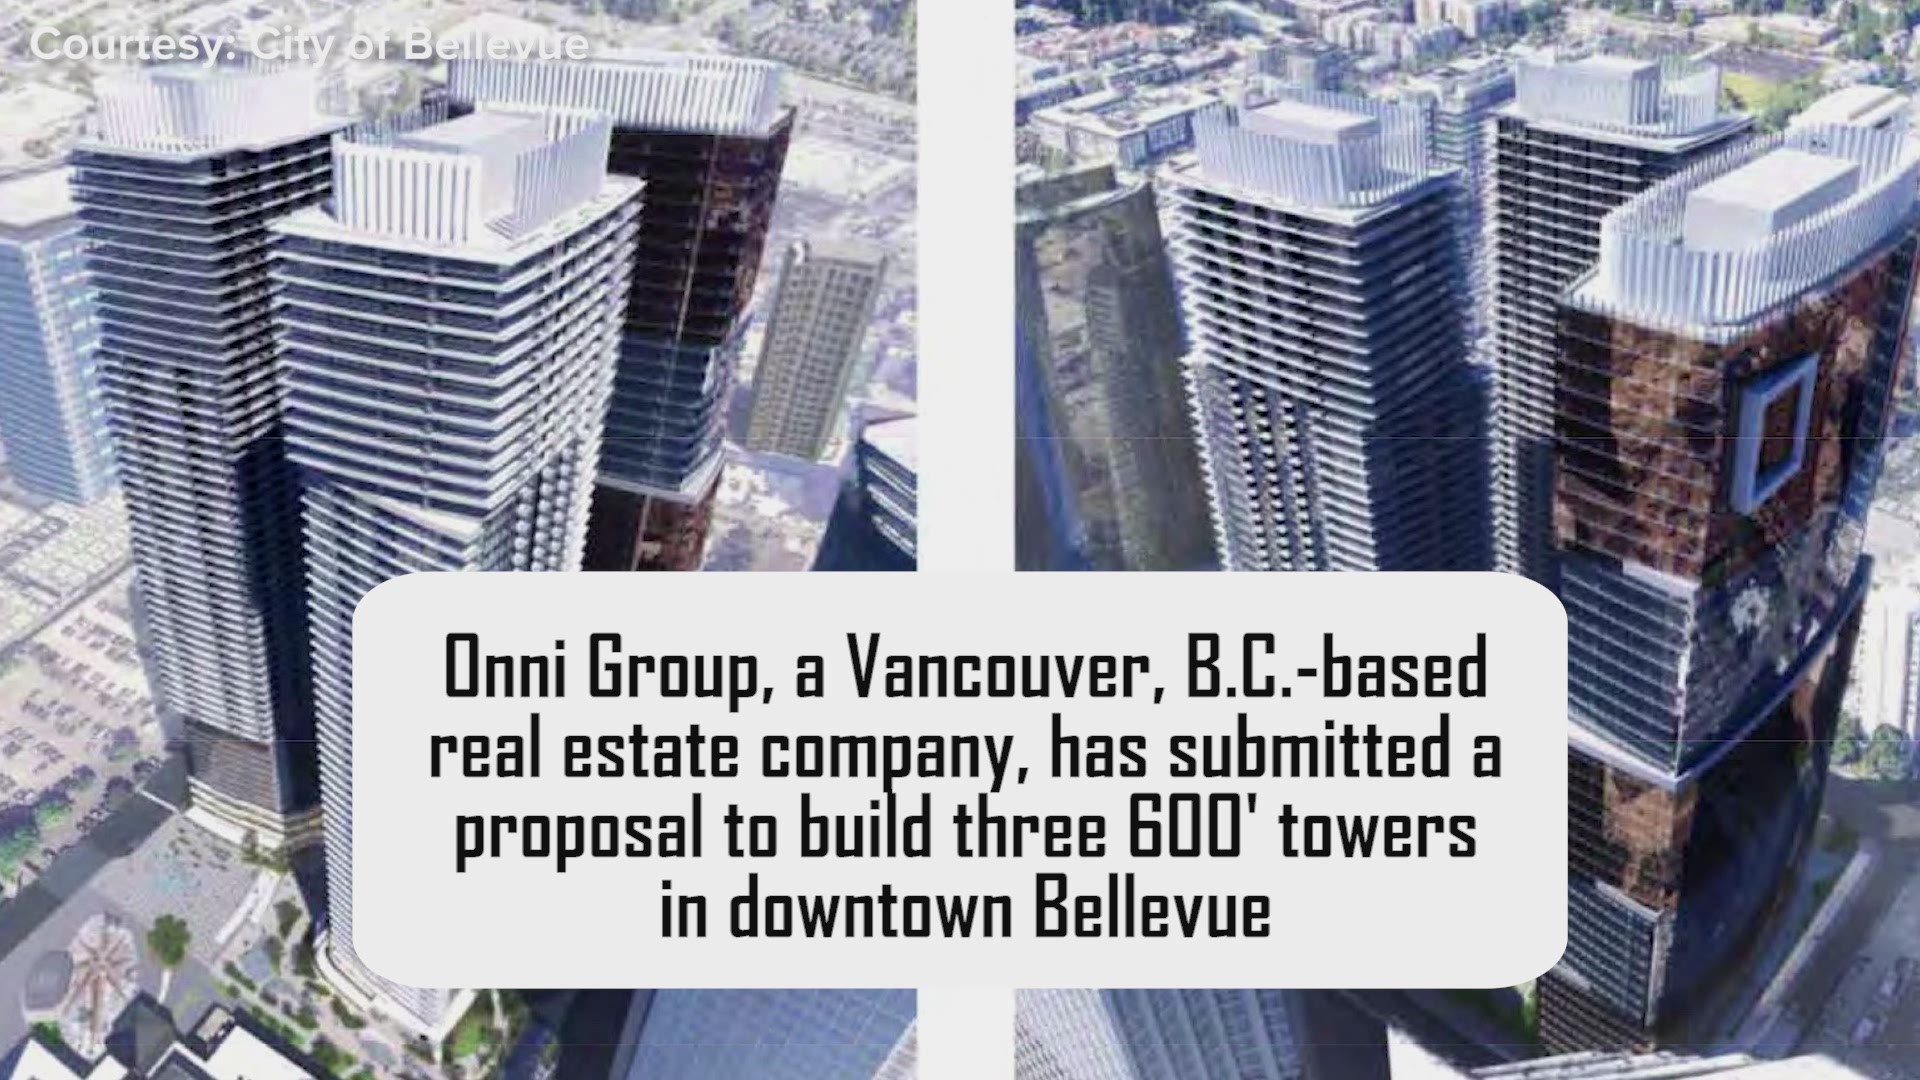 A Vancouver, B.C.-based developer wants to add to the Bellevue skyline with three brand new 600' tall towers.